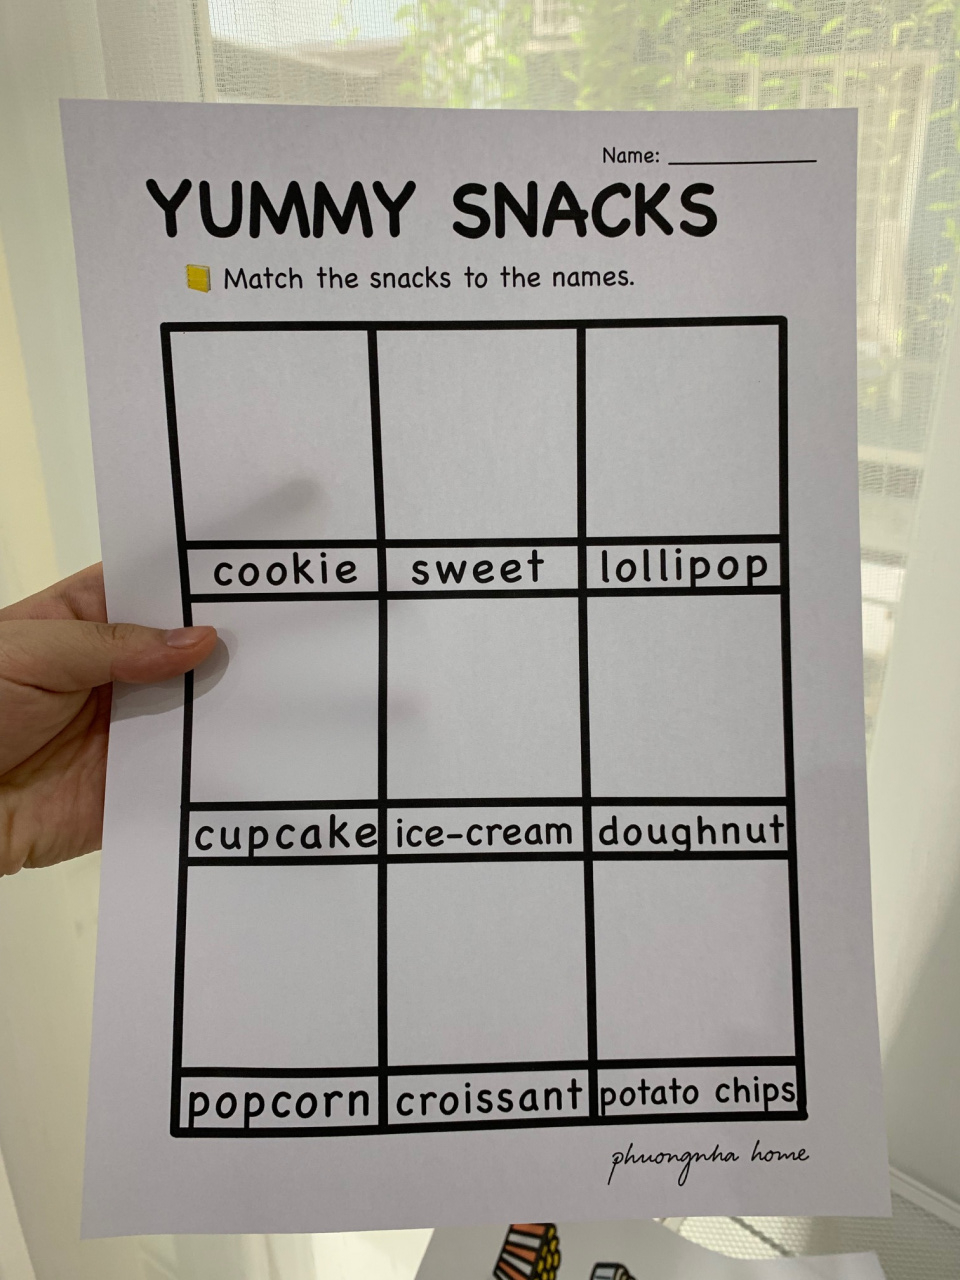 My Kids Learn About The Snacks By Pasting Match Paper